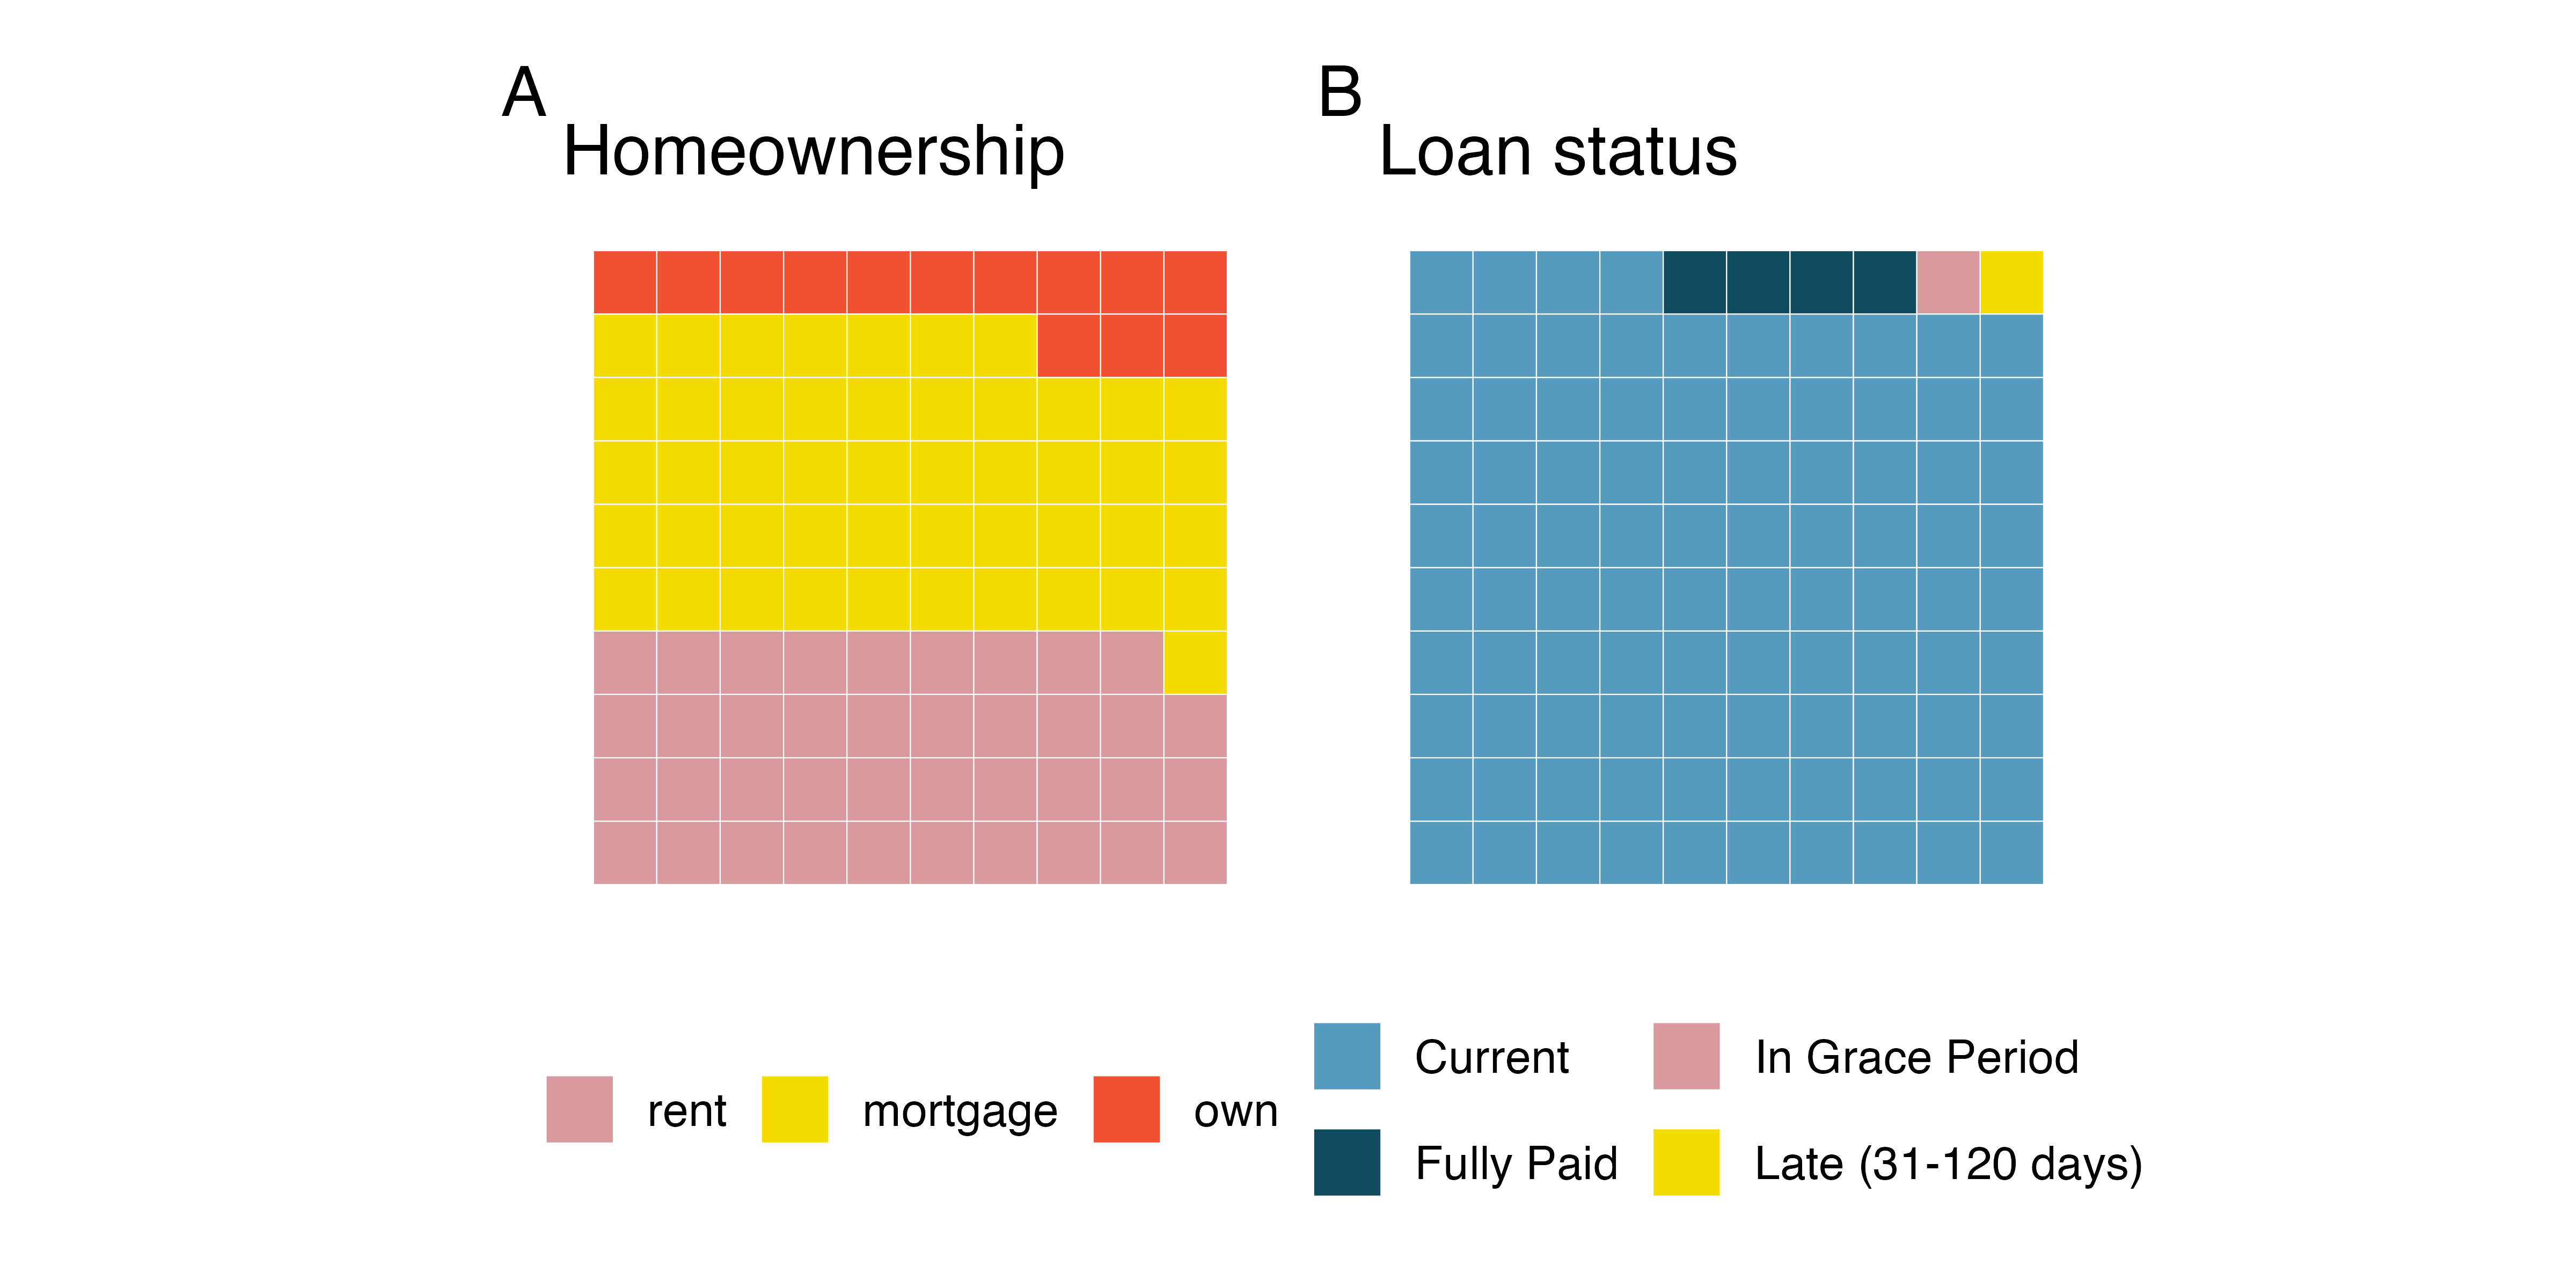 Plot A: Waffle chart of homeownership, with levels rent, mortgage, and own. Plot B: Waffle chart of loan status, with levels current, fully paid, in grace period, and late. The waffle plots below are broken down into a 10 by 10 grid where each square represents 1 percent of the data. The squares are colored proportionally to the variable distributions.